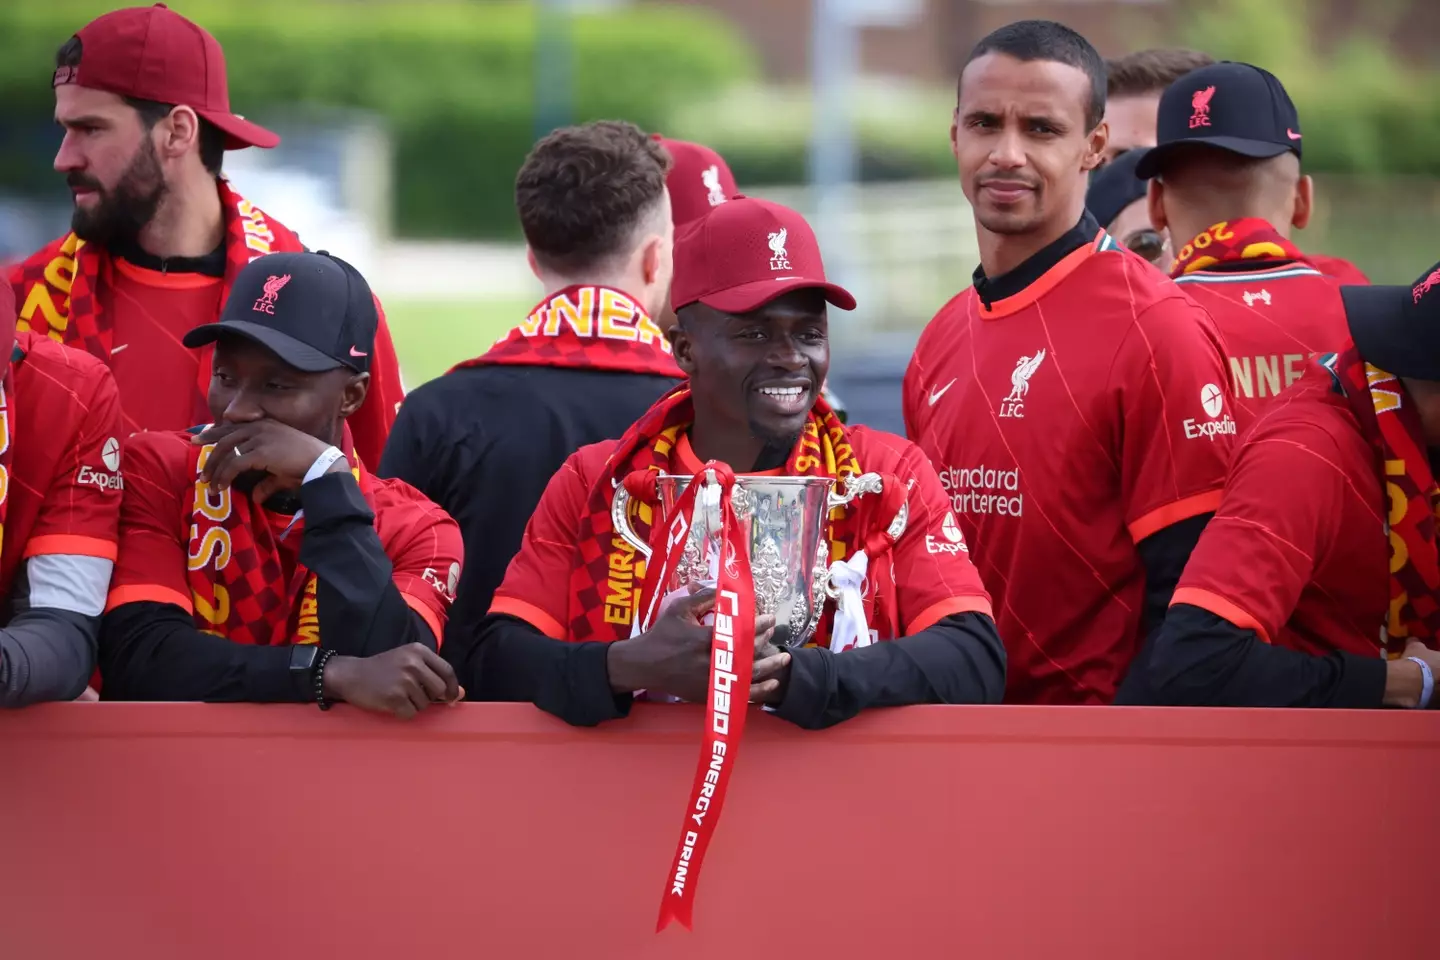 Liverpool's Sadio Mane holding the Carabao Cup trophy with Naby Keita and Joel Matip during the bus parade.